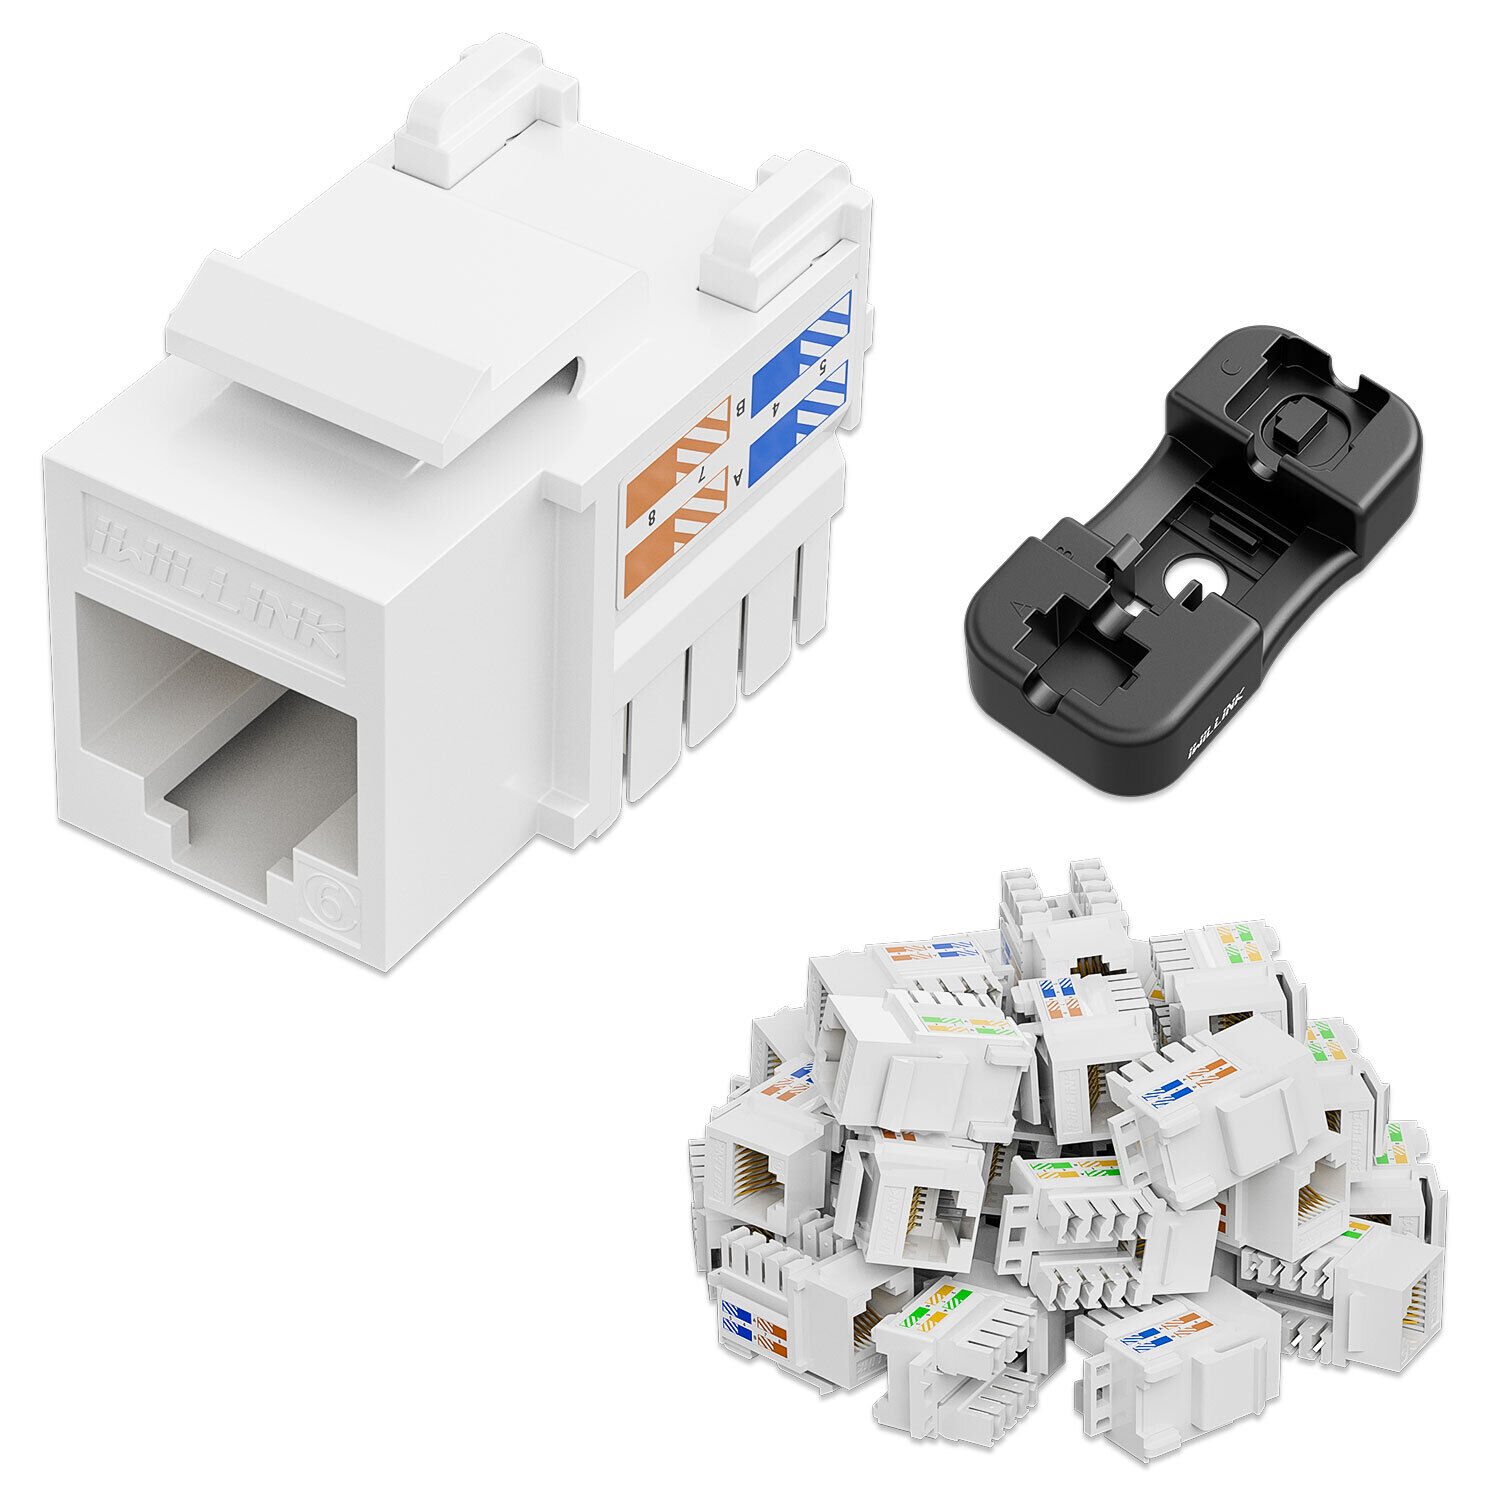 iwillink 25 Pack Cat6 RJ45 Keystone Jack and Punch-down Stand